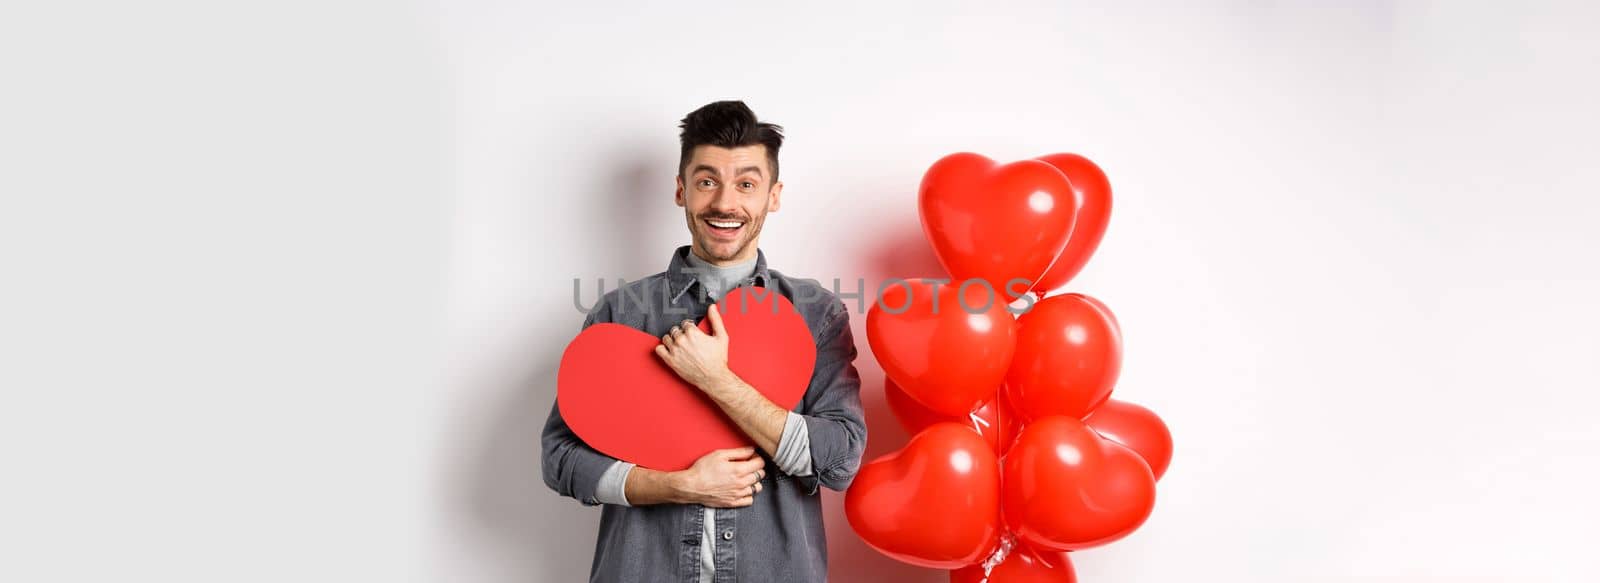 Young romantic man looking with love at camera, hugging Valentine heart card and smiling happy, celebrating lovers holiday, standing near red balloons, white background.